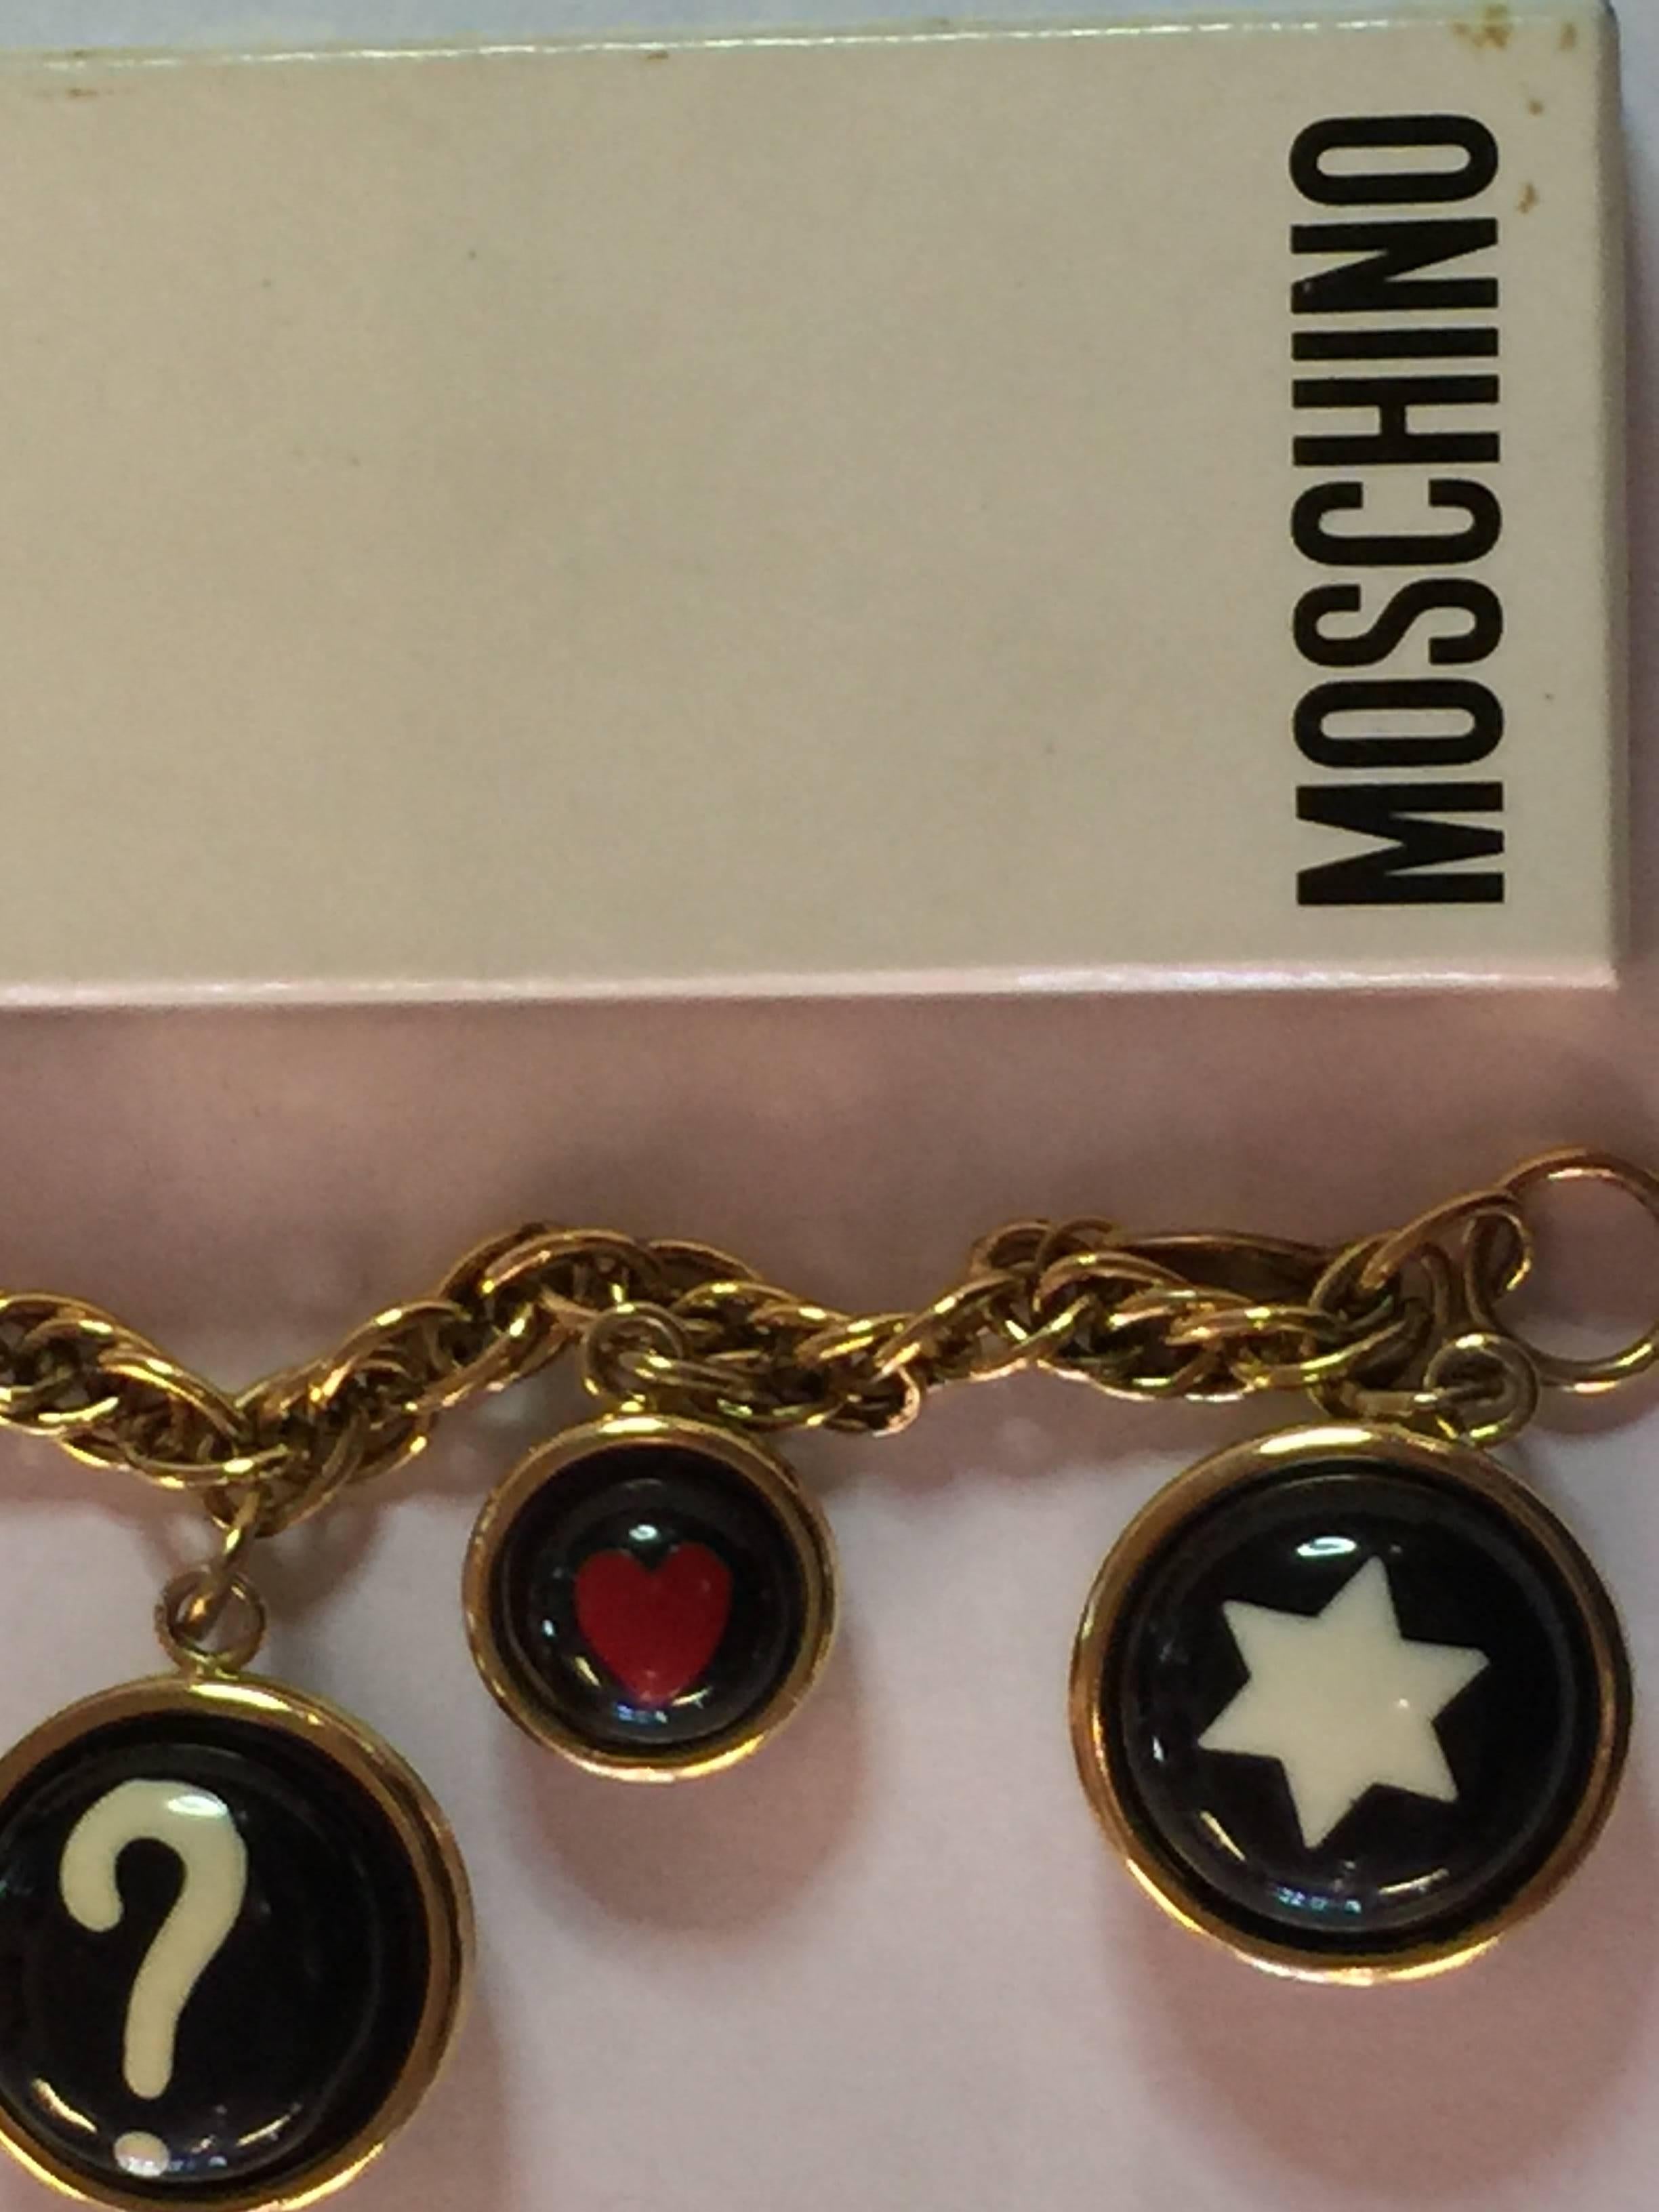 This iconic MOSCHINO charm bracelet utilizing iconic and favorite symbols, the question mark, the heart and the star are enblematic of the jewelry of this storied European fashion designer. Mosly famous for haute coture and eccentric and humorous